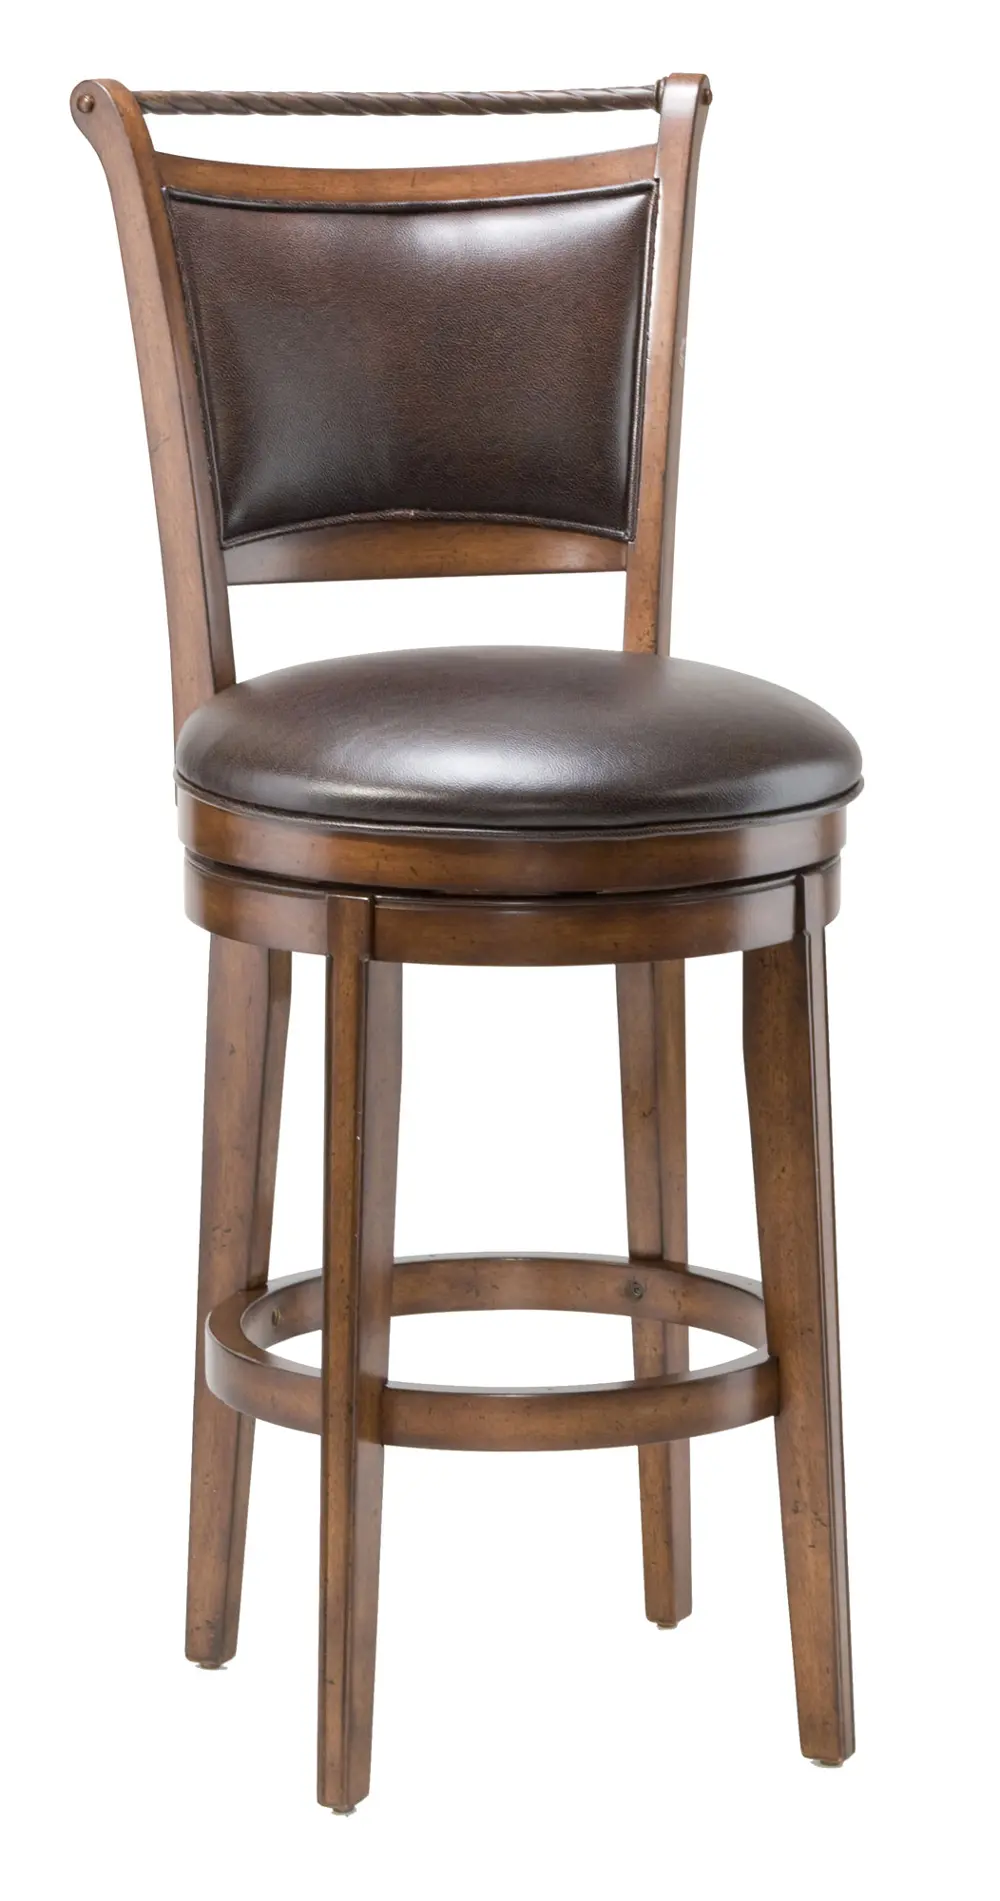 Distressed Brown Cherry 26 Inch Counter Stool - Calais-1